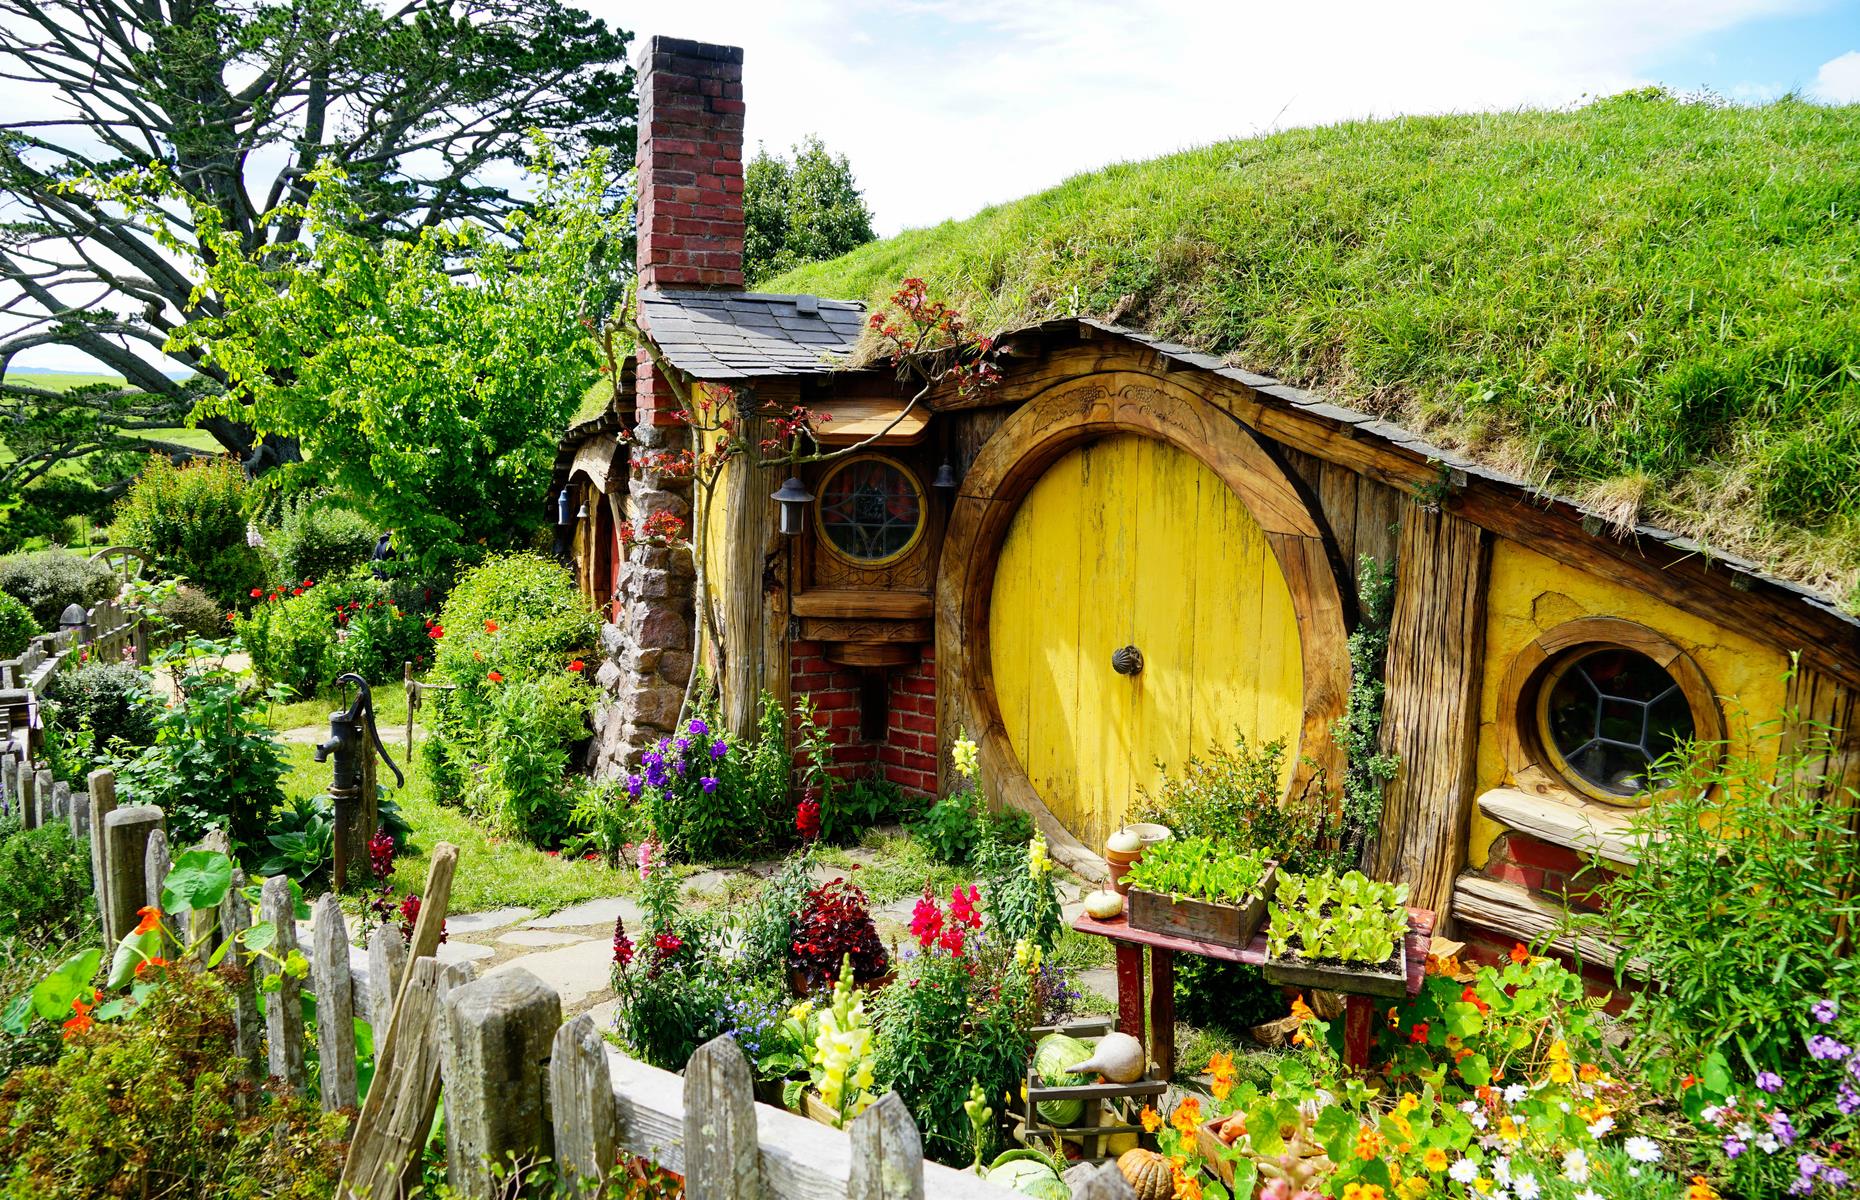 <p>Kiwi film director Sir Peter Jackson shot much of <em>The Lord of the Rings</em> trilogy on location in the epic landscapes of New Zealand. Hobbiton, however, was built from scratch (and rebuilt for <em>The Hobbit</em>) on farmland just outside the small Waikato town of Matamata. The <a href="https://www.hobbitontours.com/">movie set</a> is now one of the country’s most visited tourist attractions and offers guided tours, dinner feasts, special weekend breakfast experiences and more.</p>